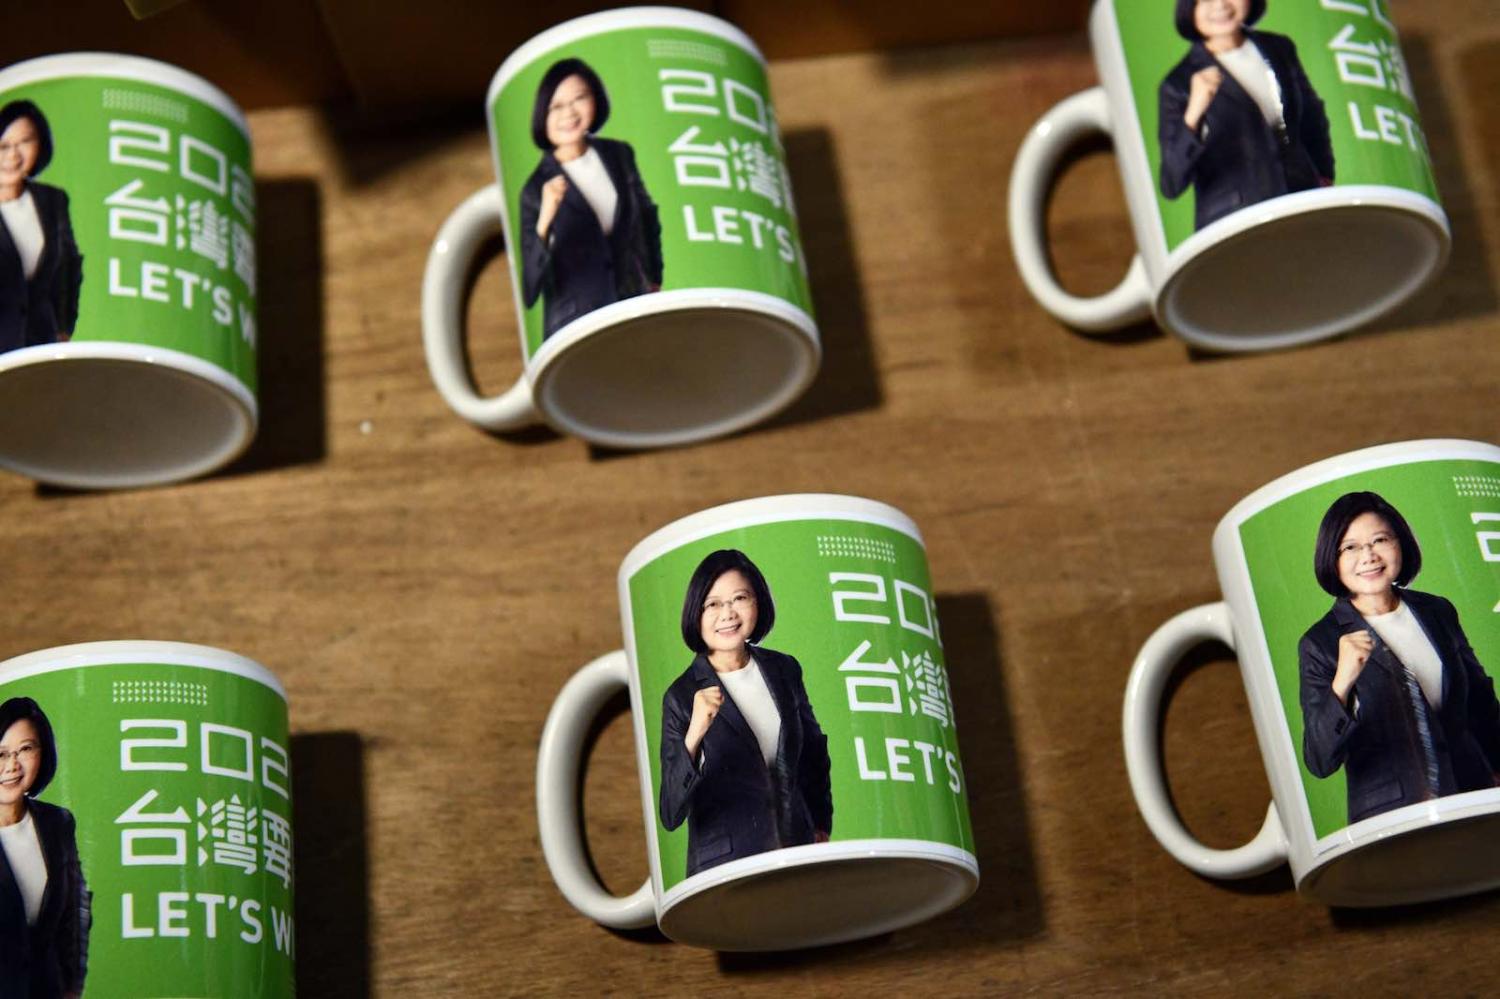 Tsai Ing-Wen–branded mugs are displayed for sale after her re-election as President of Taiwan, Taipei, 11 January (Photo: Carl Court/Getty Images)